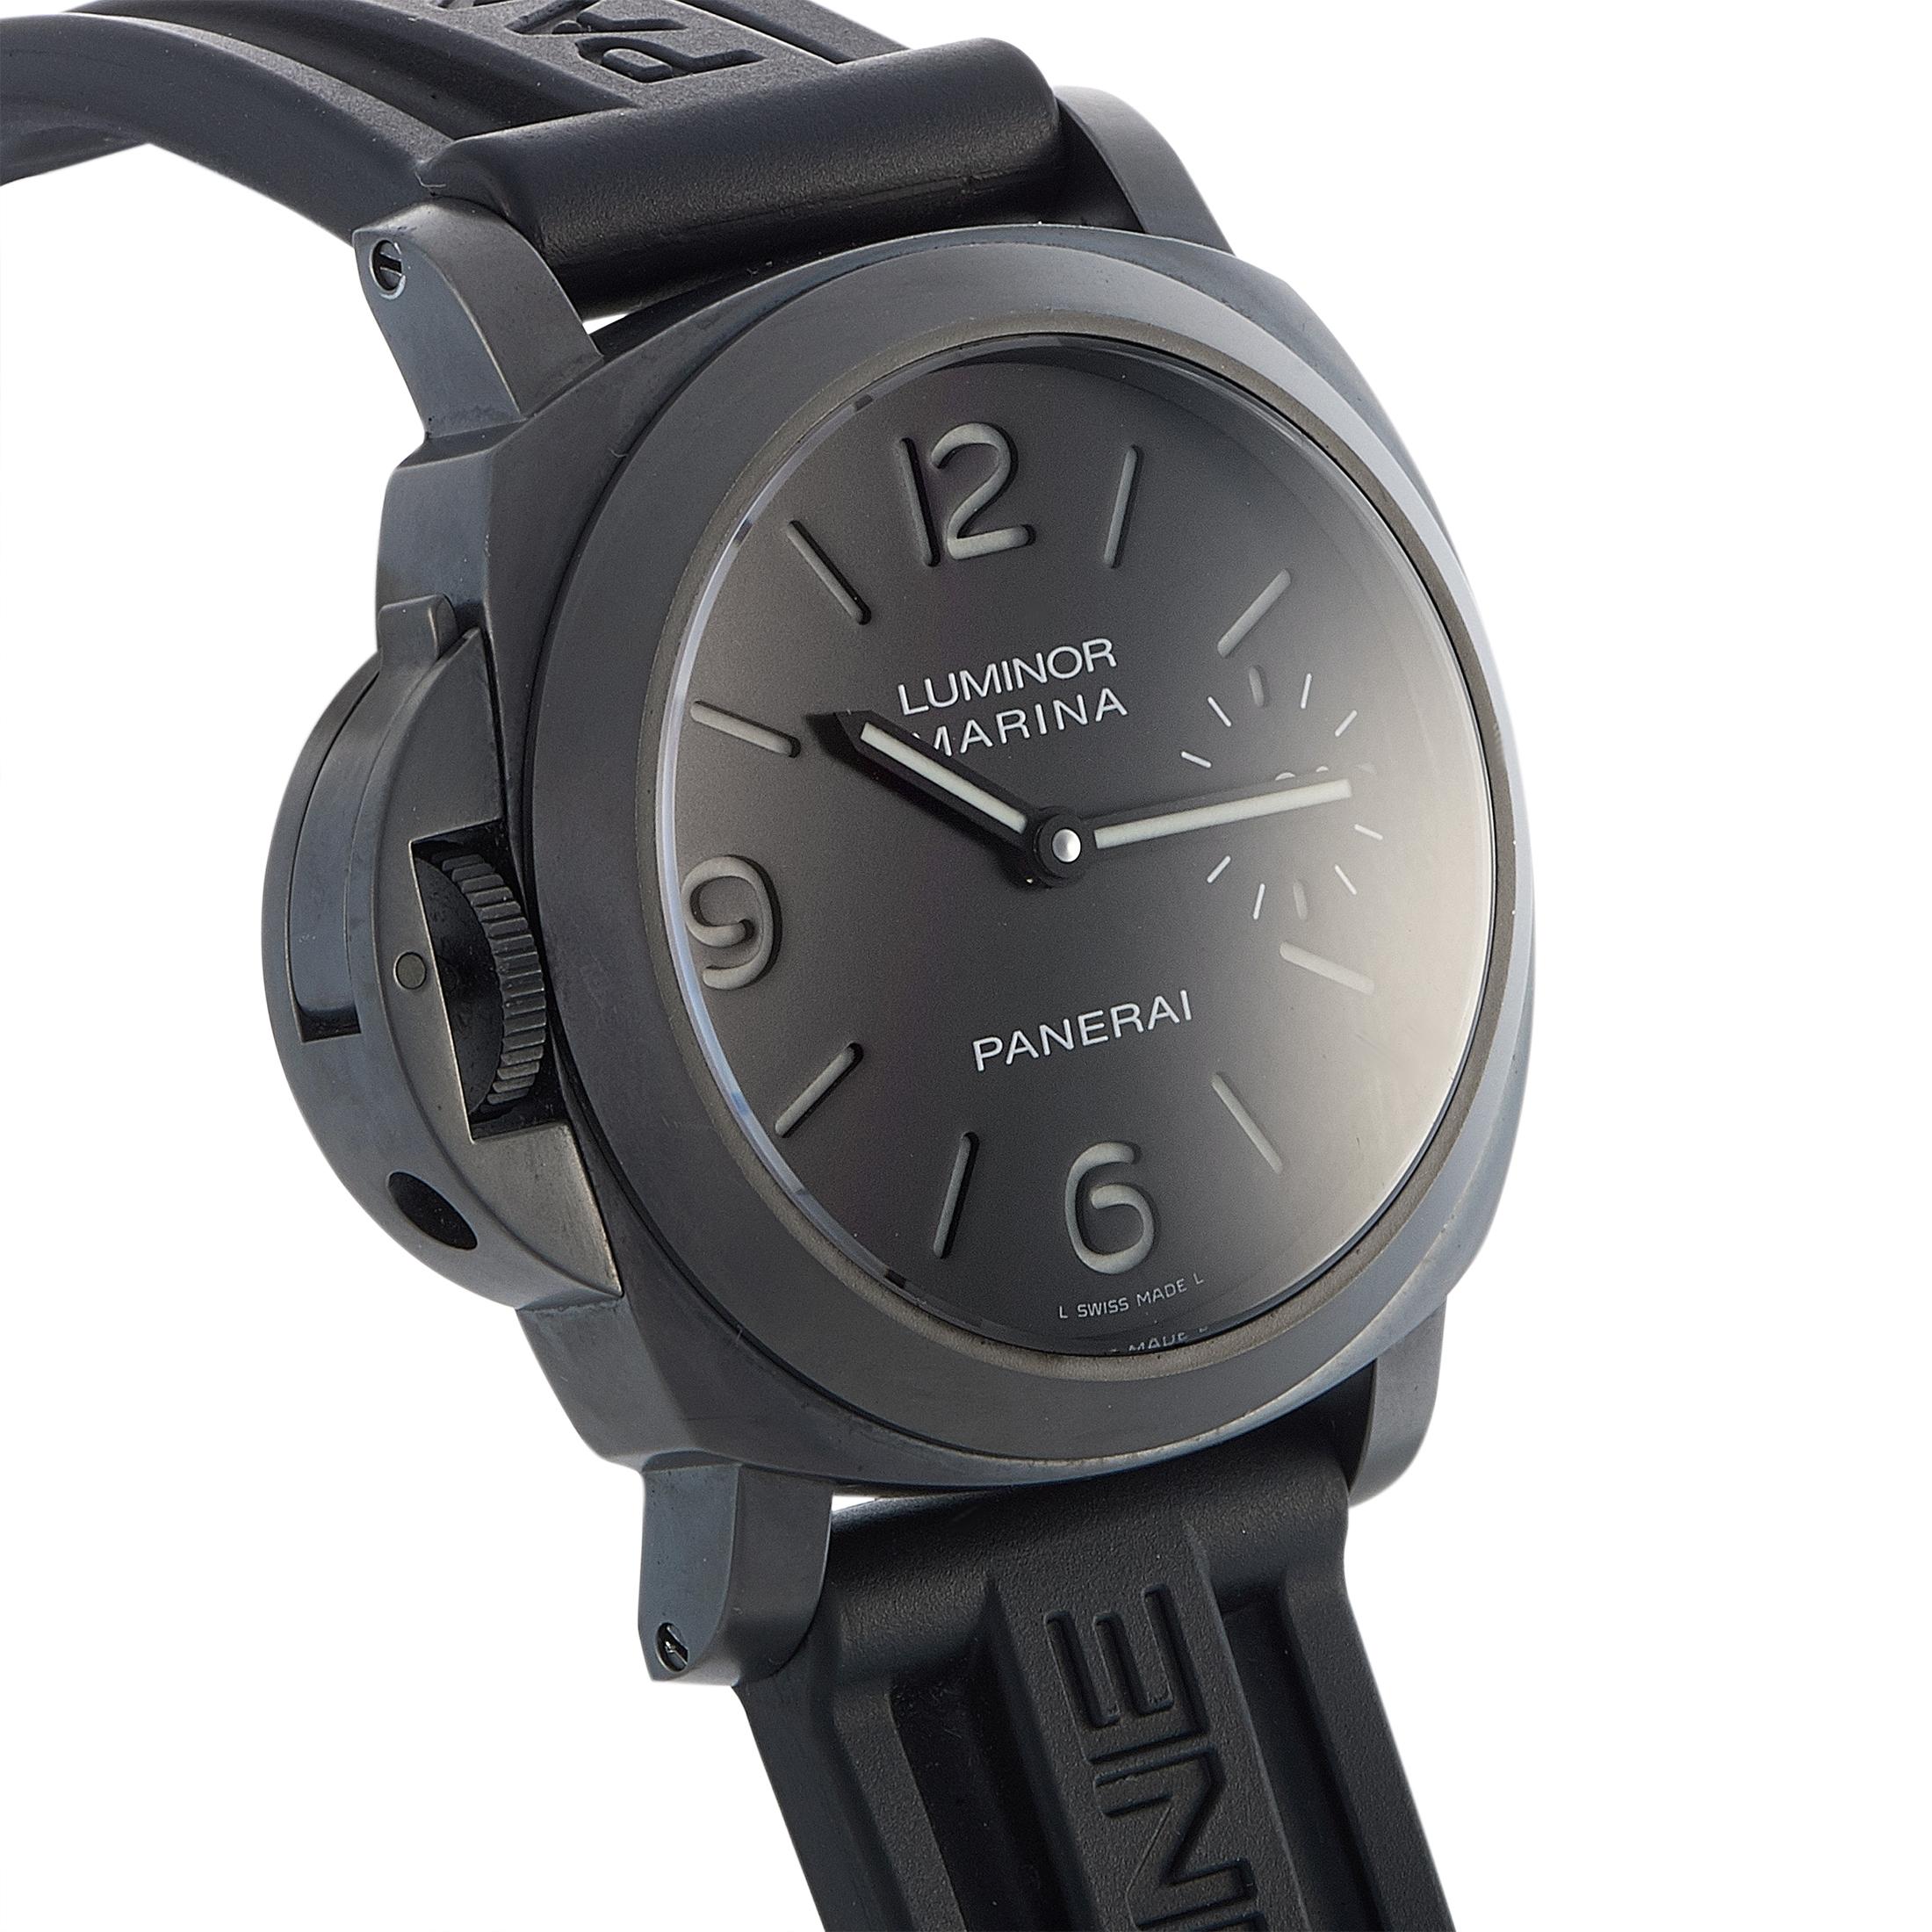 The Officine Panerai Luminor Marina Left-Handed - 44 mm, reference number PAM00026, is presented in an edition limited to 1,000 pieces.

The watch comes with a PVD-coated stainless steel case that measures 44 mm in diameter. This model is equipped